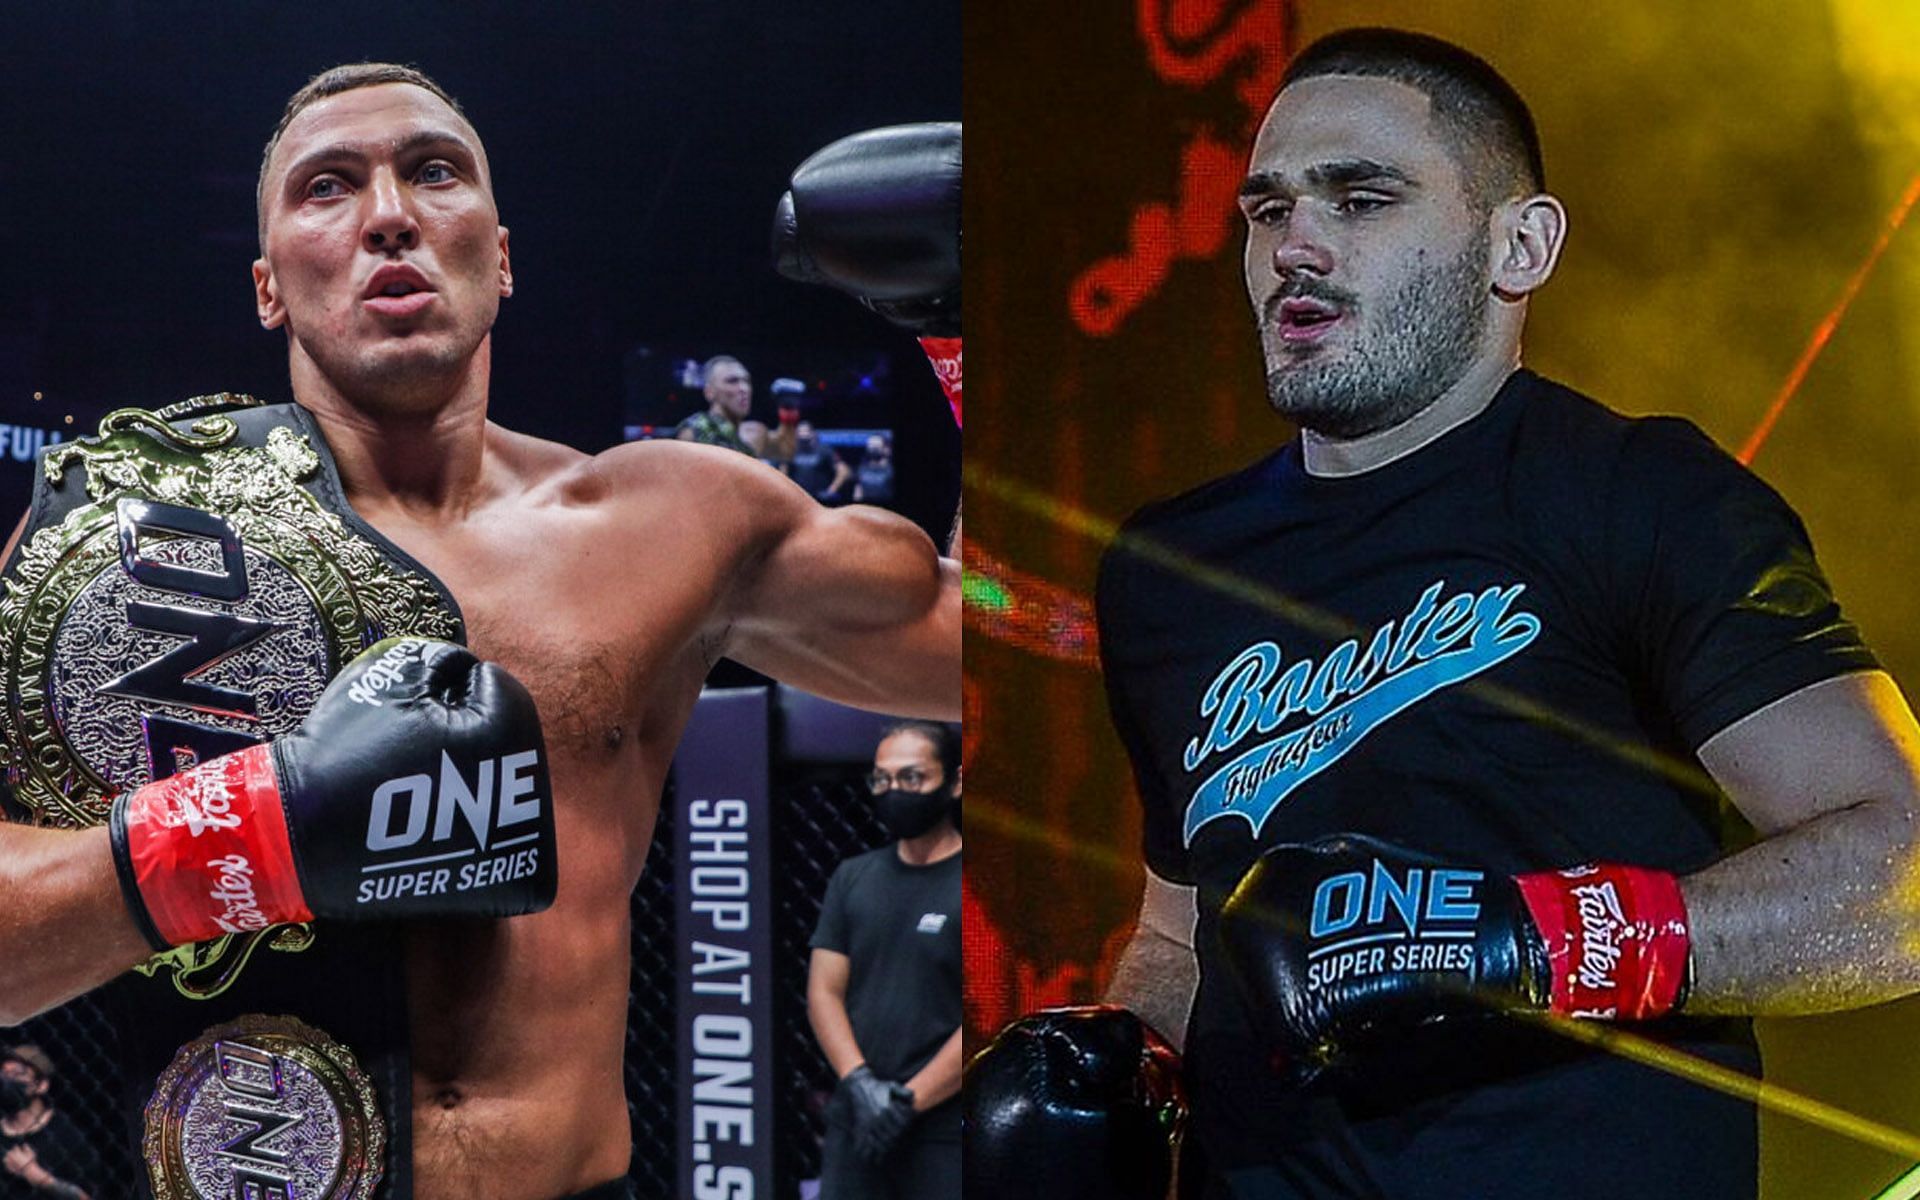 Roman Kryklia (Left) is looking to move up to heavyweight and challenge Rade Opacic (Right). | [Photos: ONE Championship]